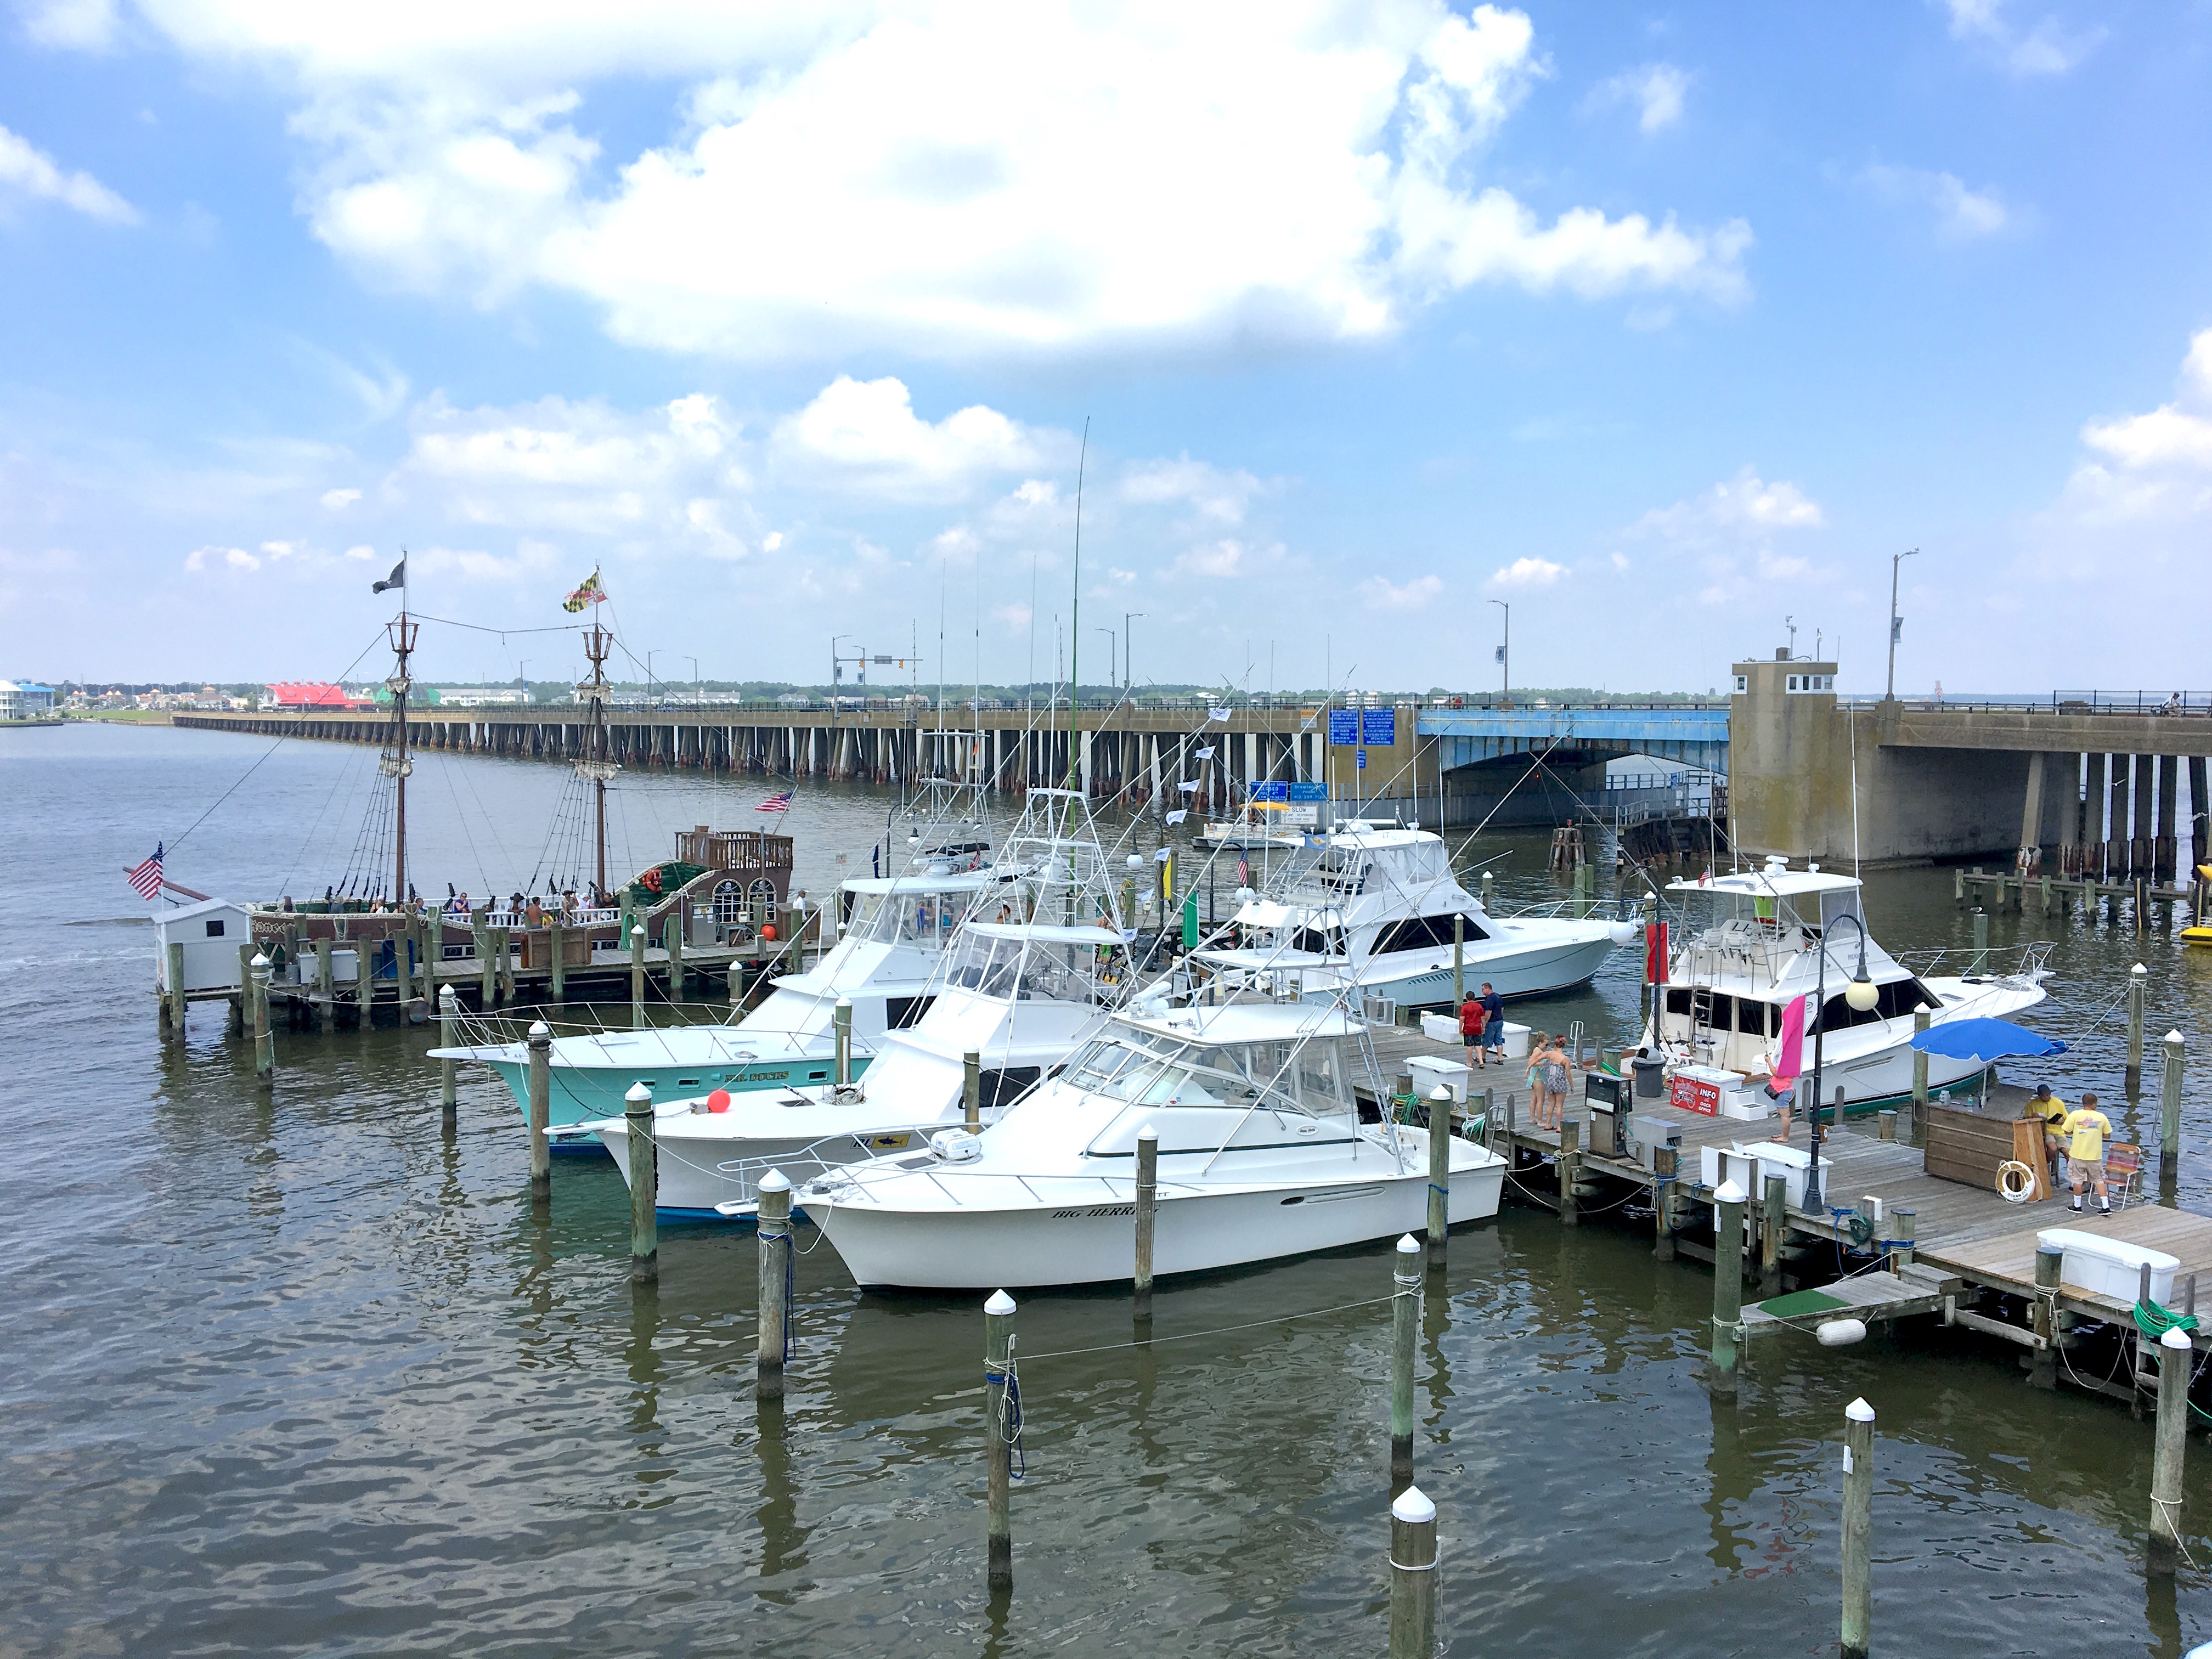 View of the Talbot St. Pier with boats and the Buccaneer.